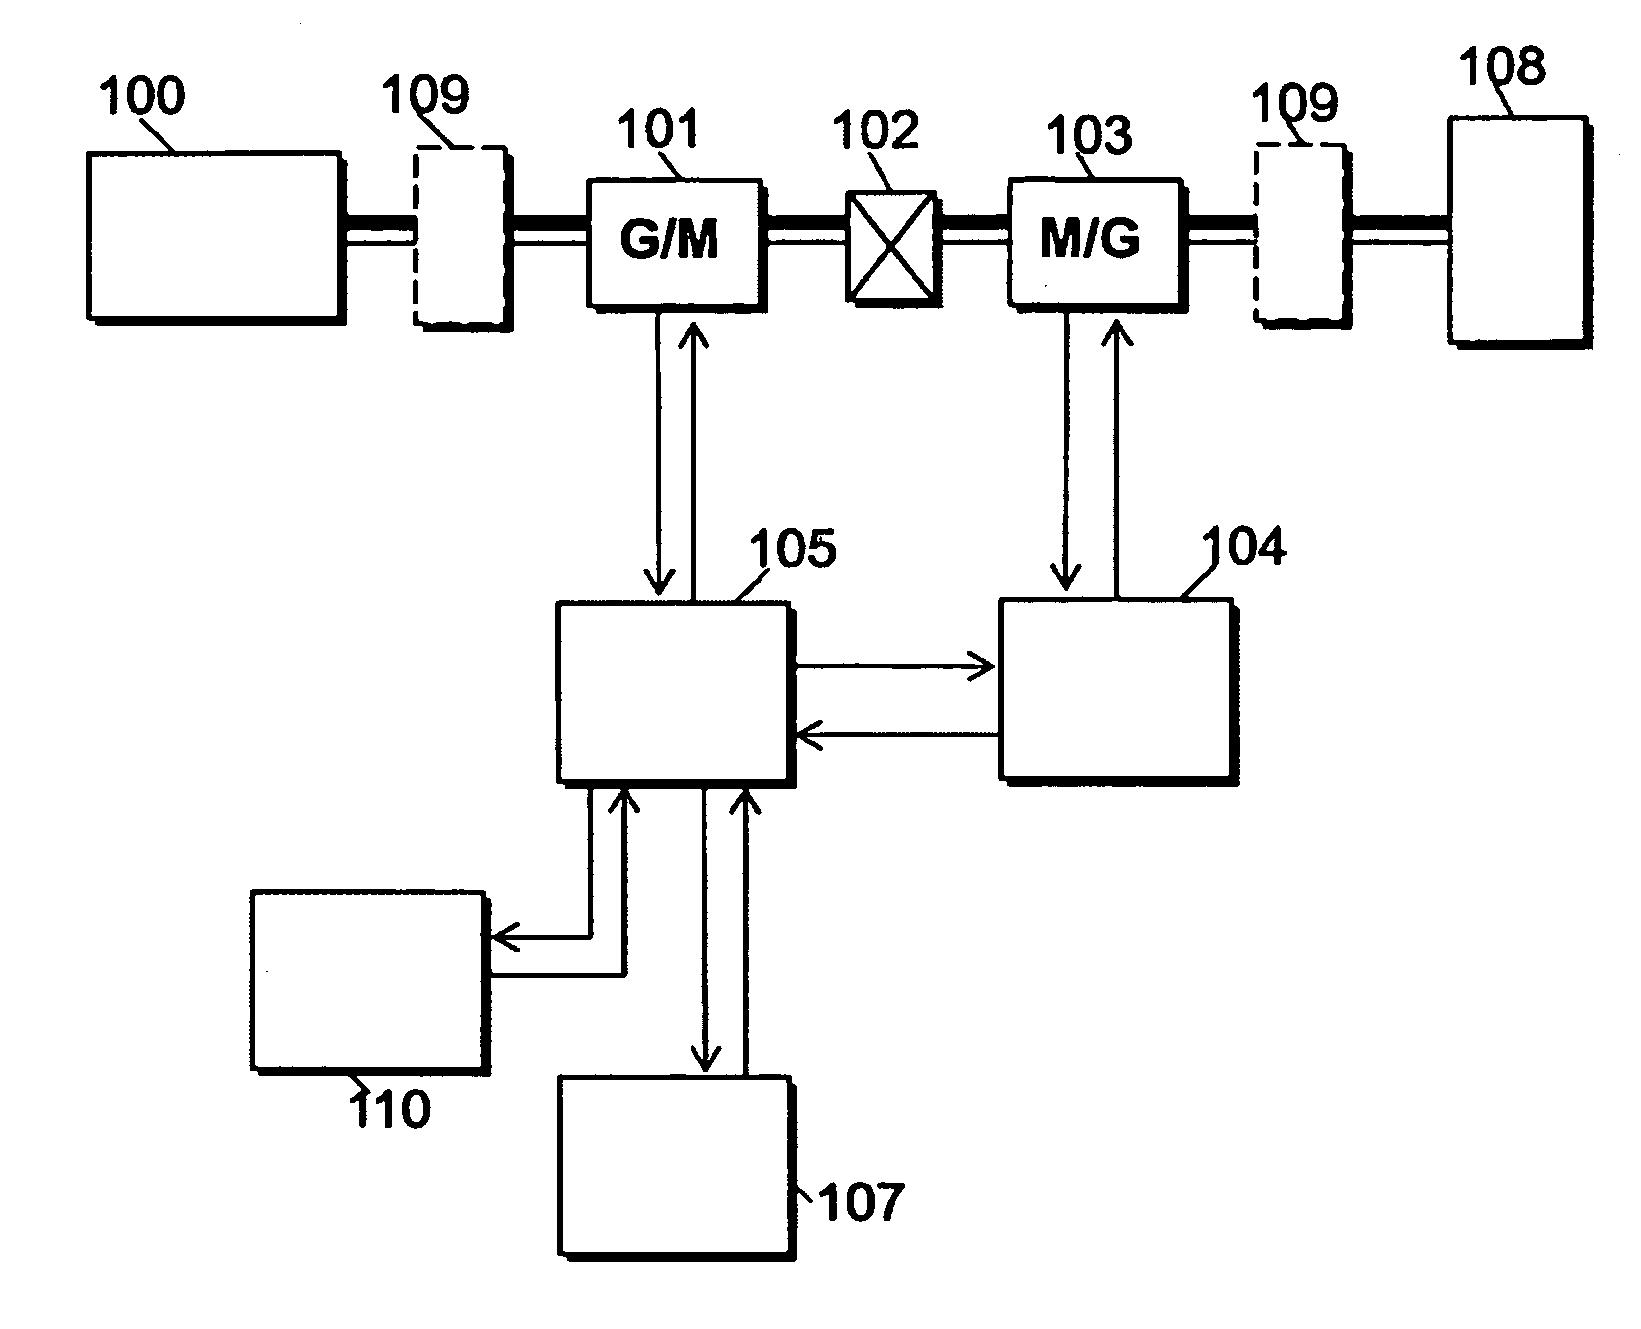 Partial-powered series hybrid driving system